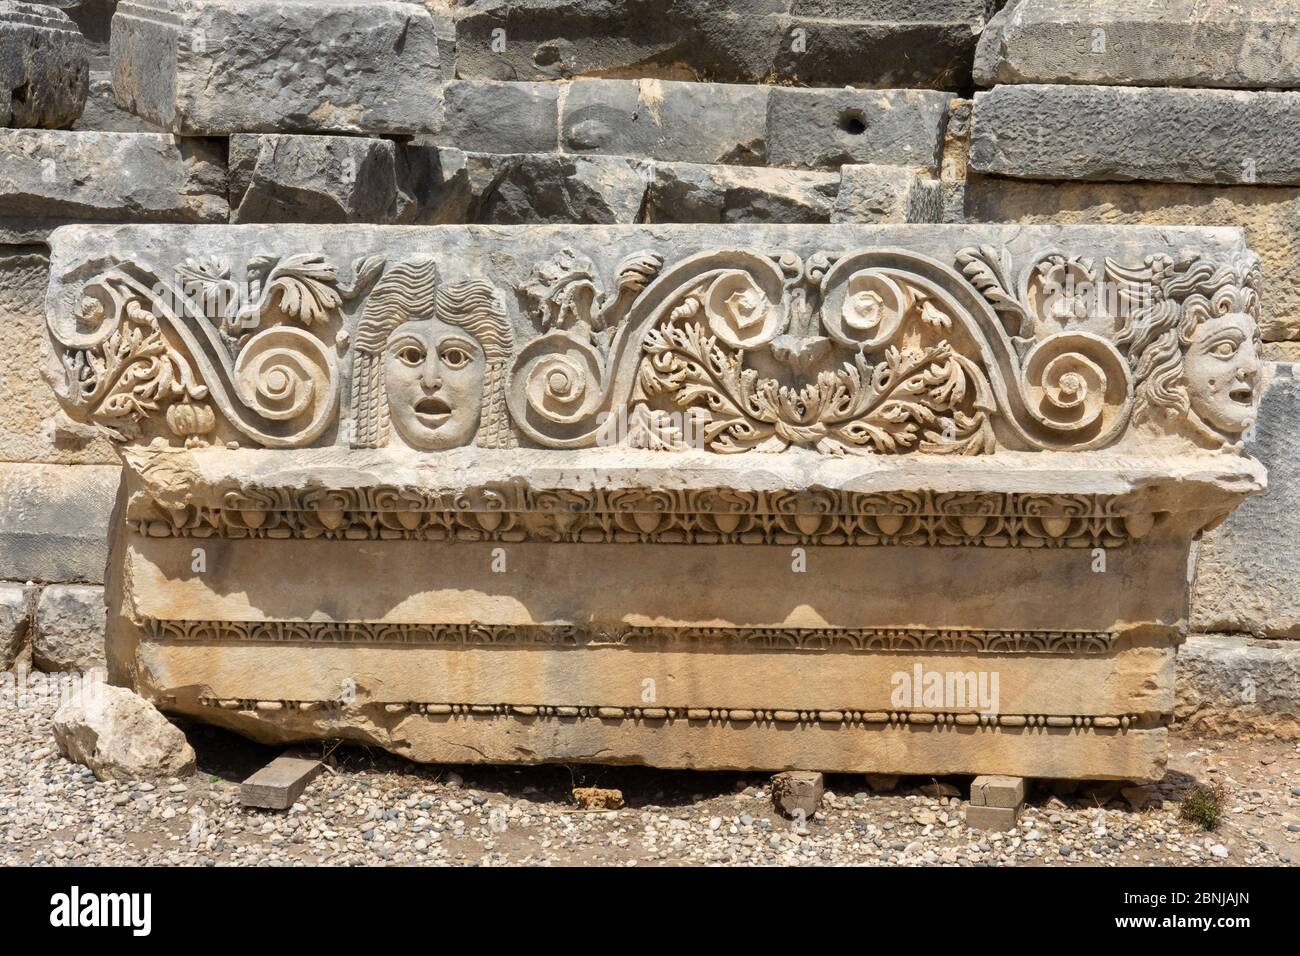 Fragment of the facade with the image of stone masks of the Greco-Roman amphitheater of the ancient city of Myra in Demre, Antalya Province, Turkey Stock Photo